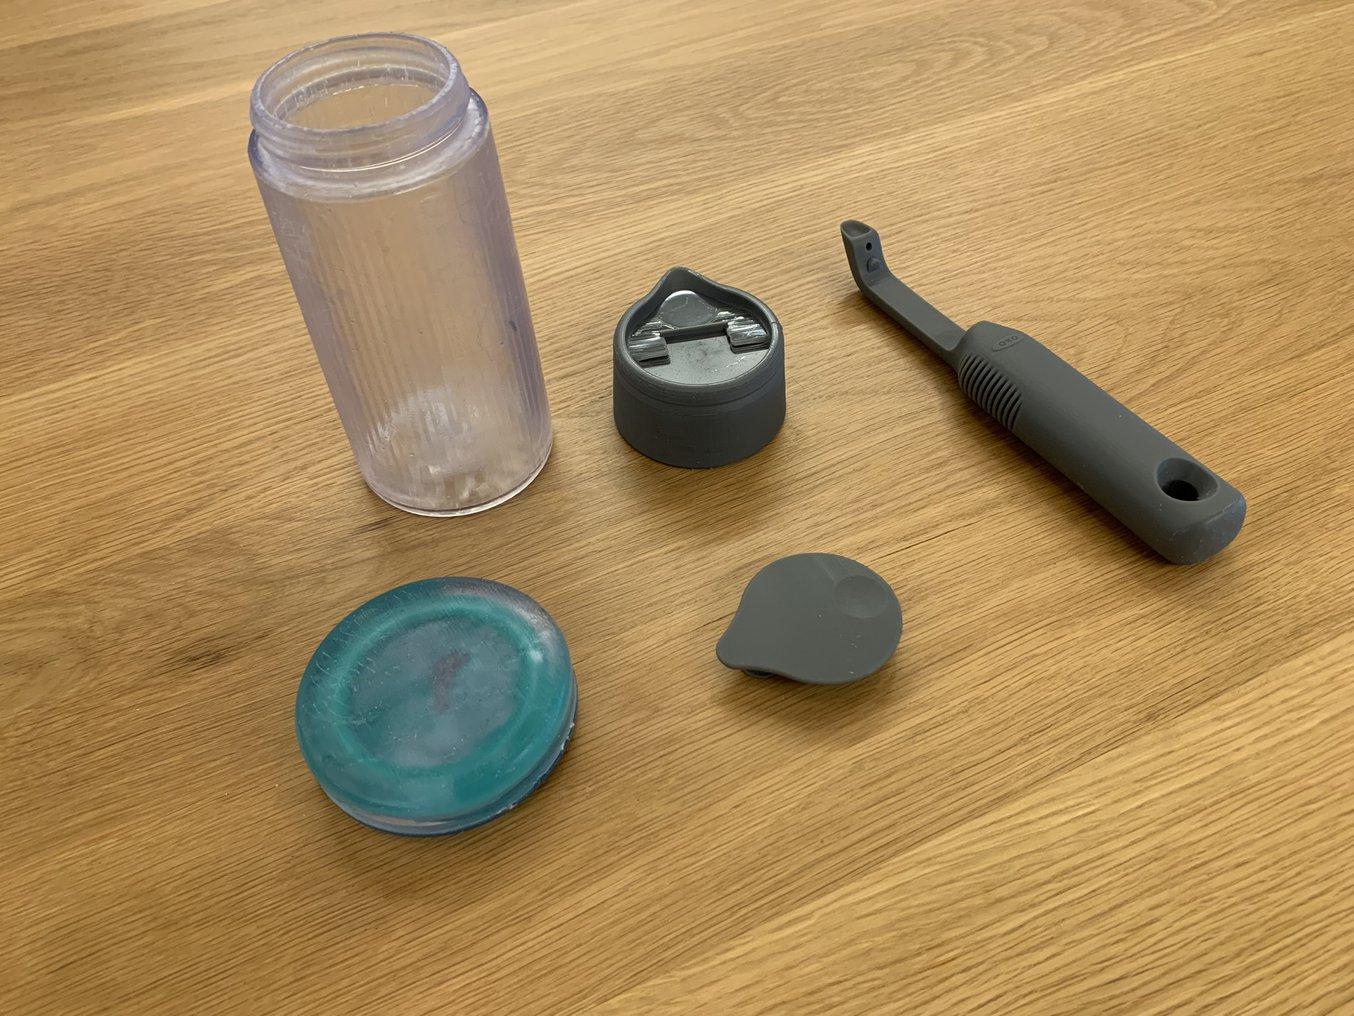 several 3D printed prototypes that OXO has designed and iterated on Form 4